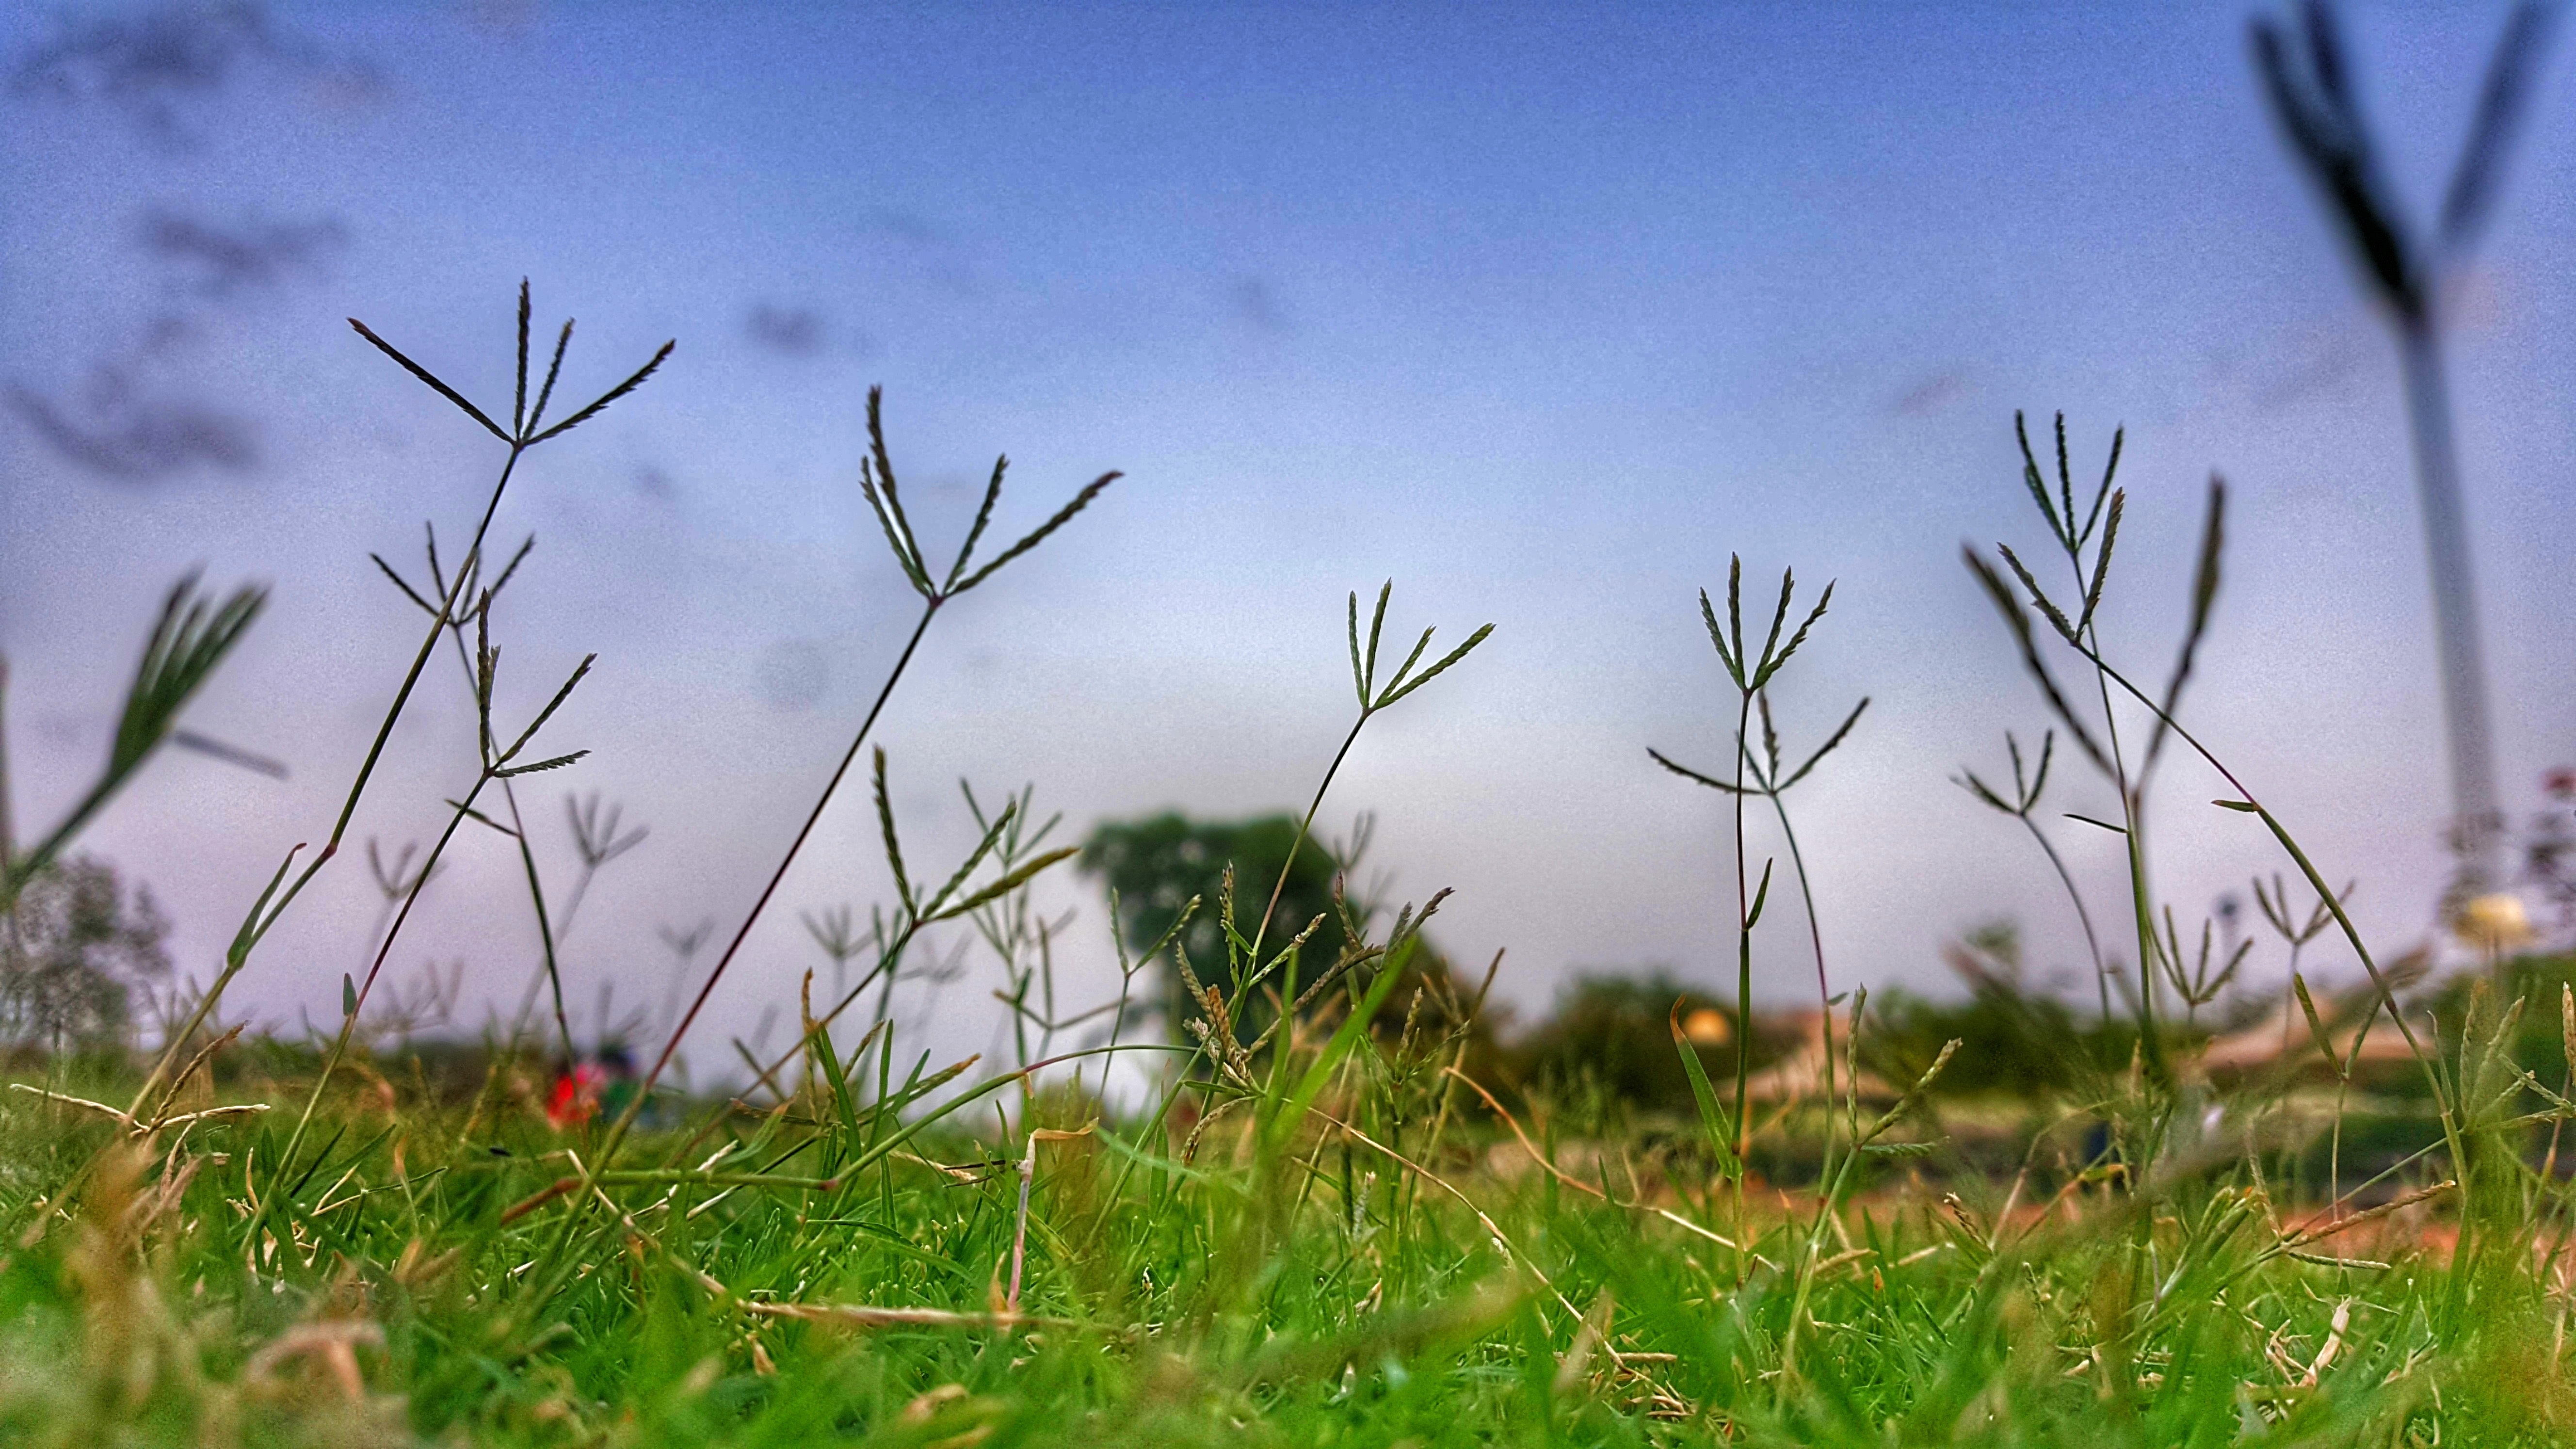 Close-up photography of grass